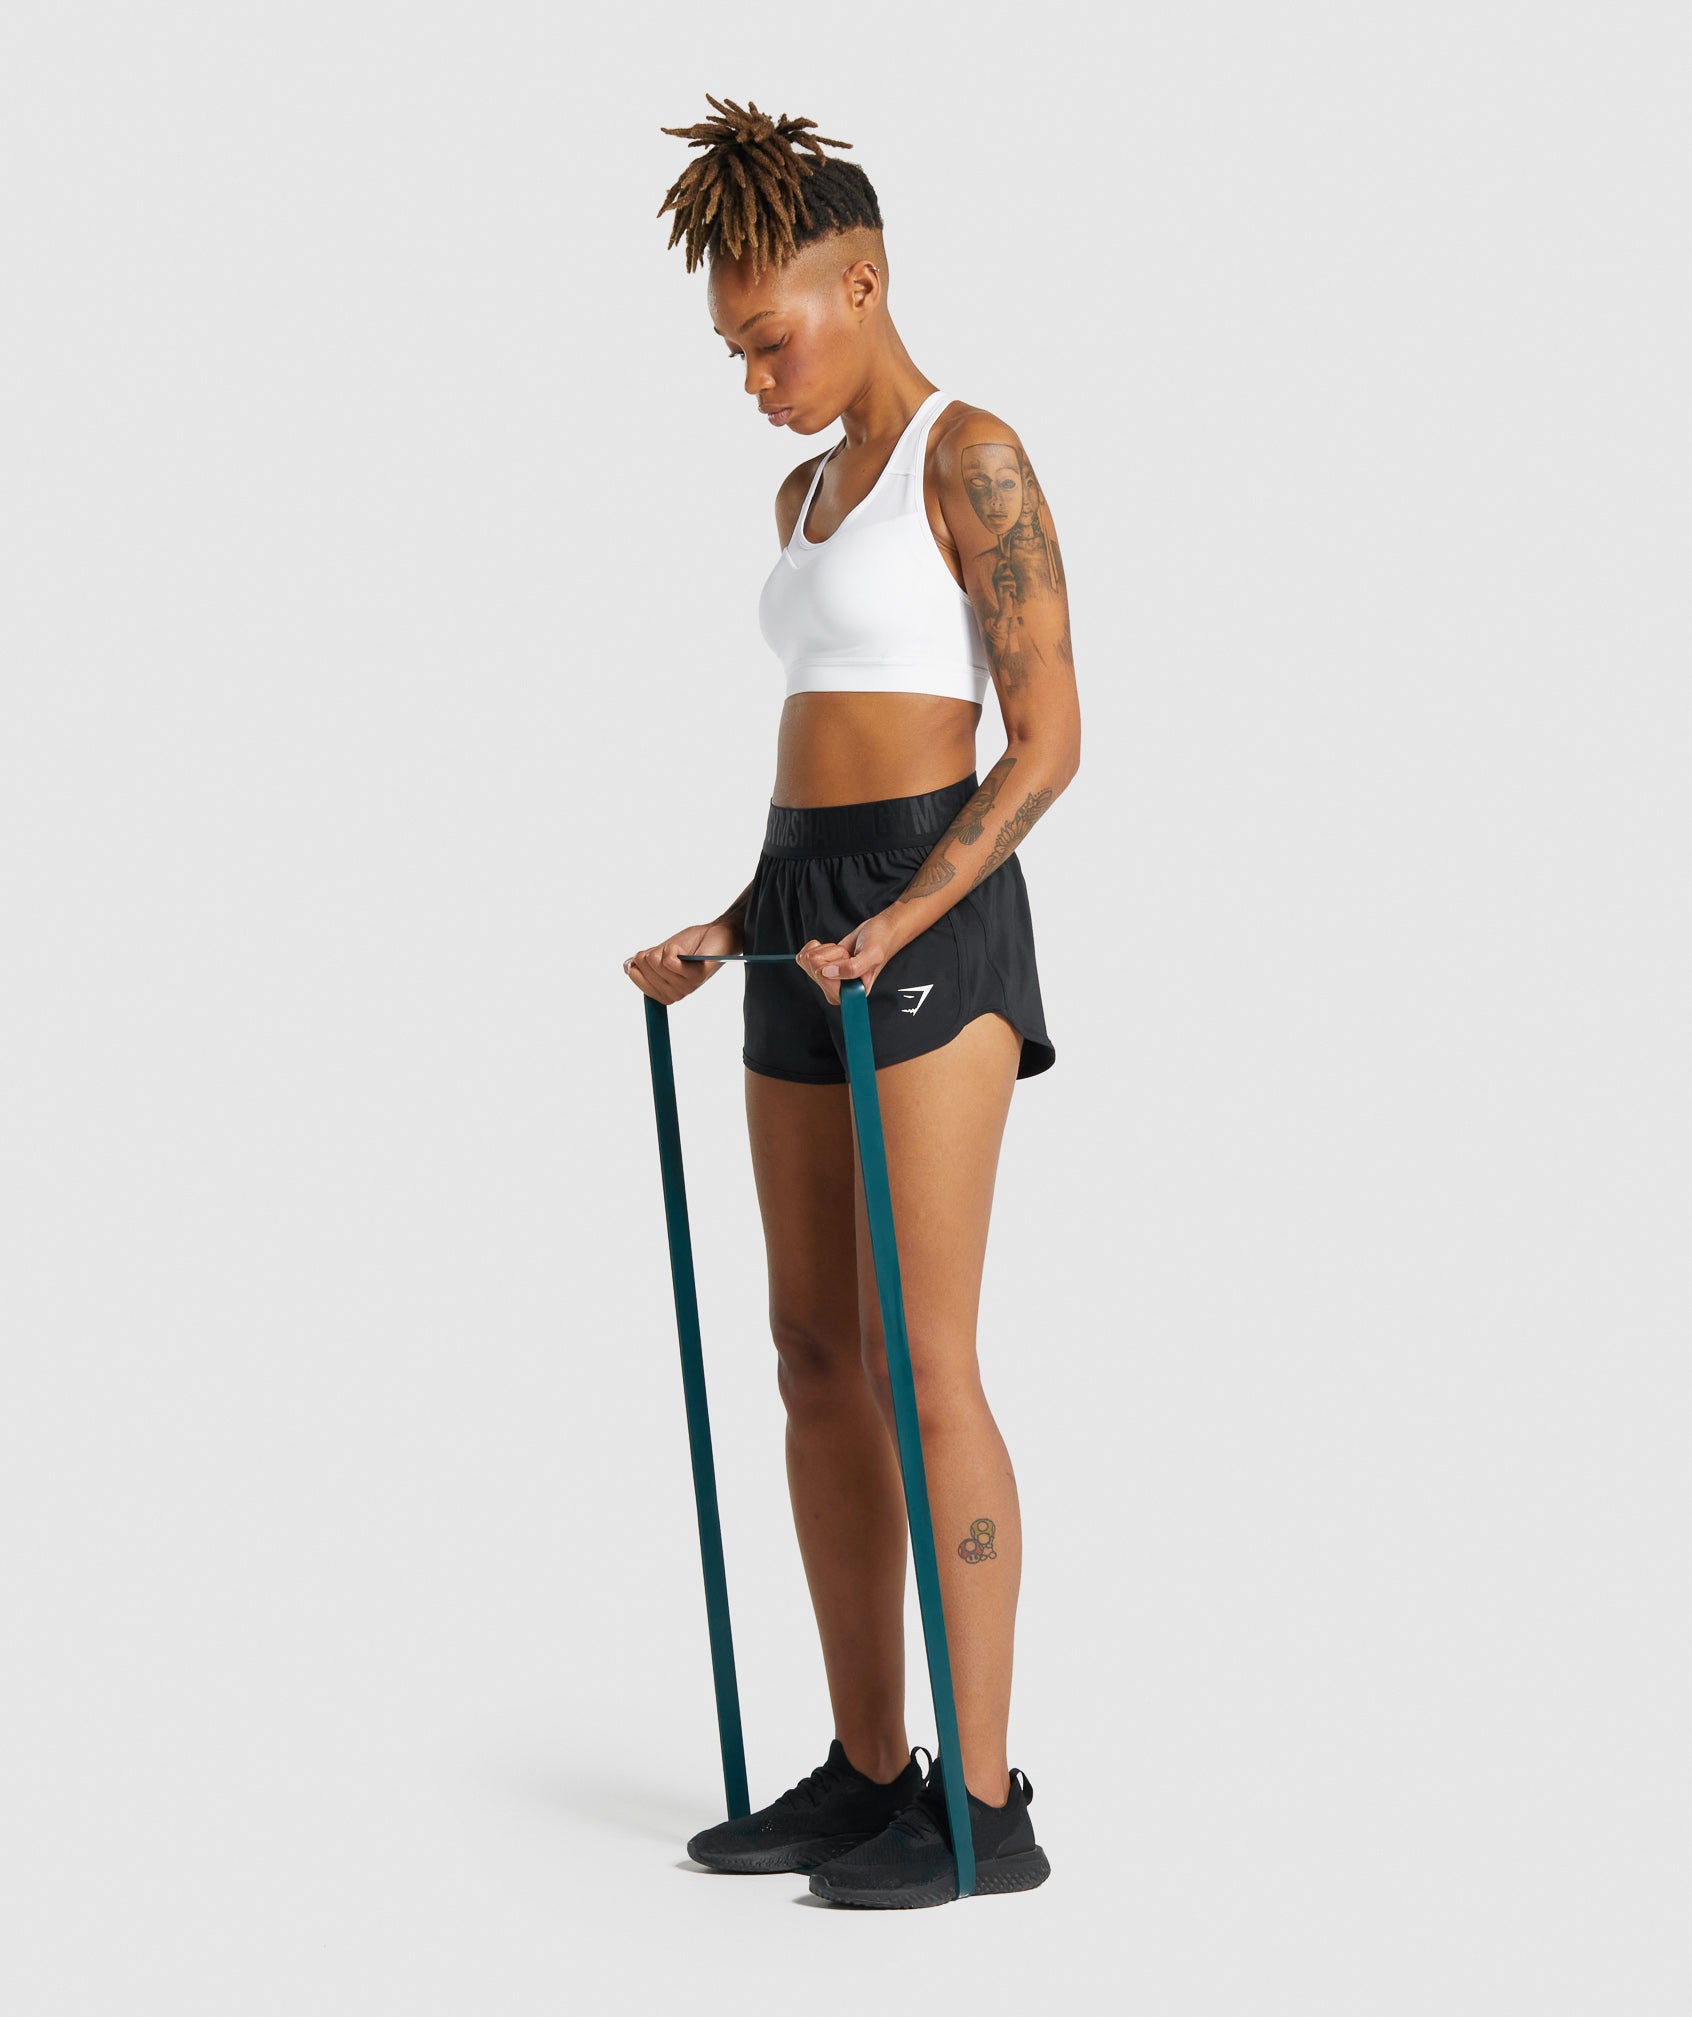 11kg to 36kg Resistance Band in Teal - view 6